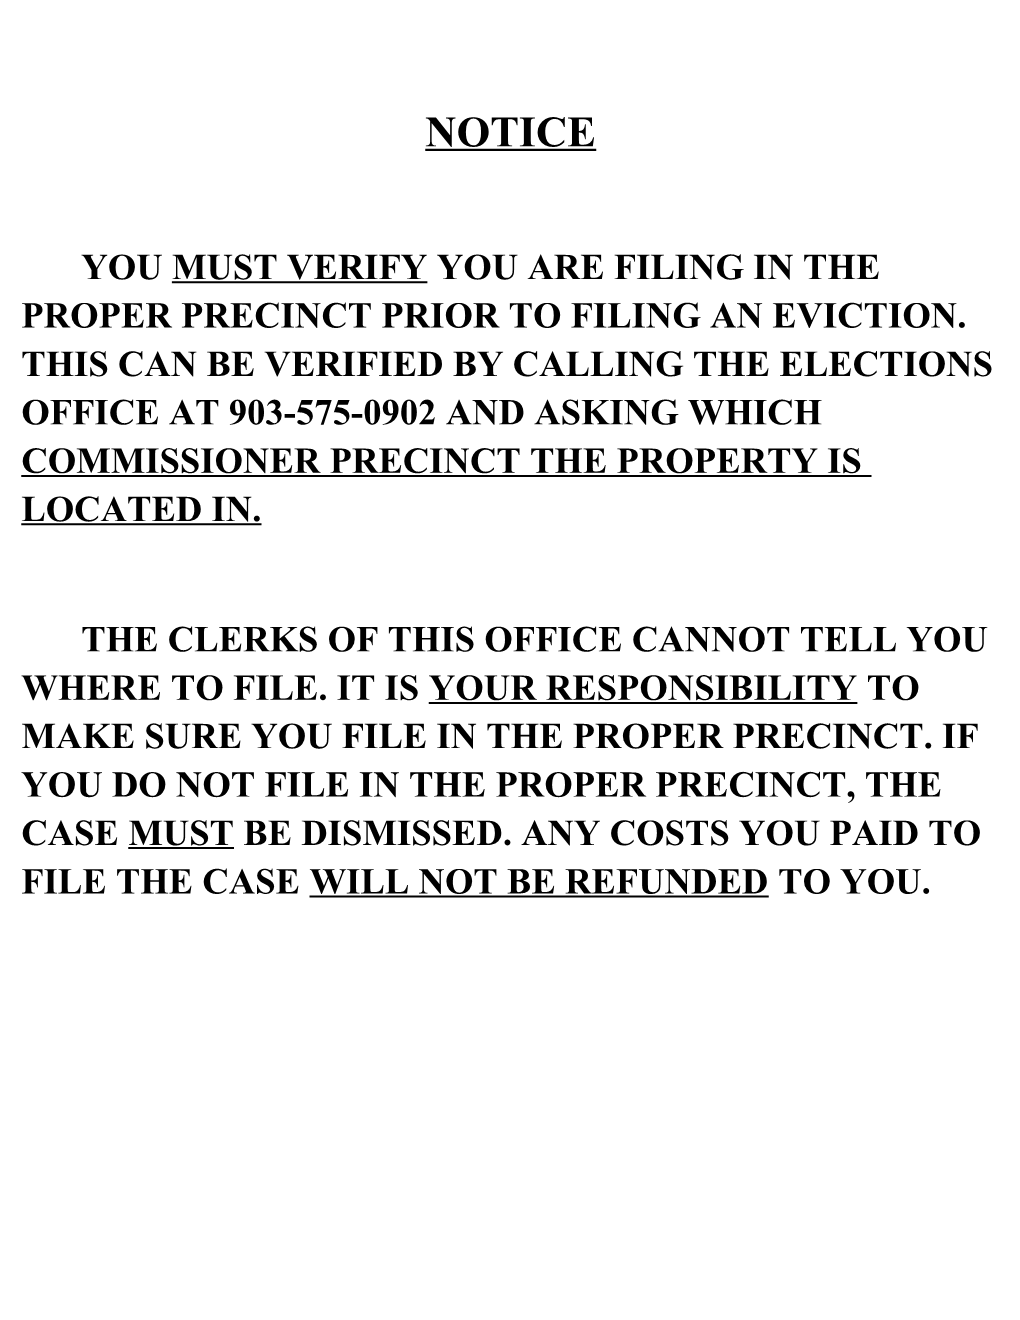 You Must Verify You Are Filing in the Proper Precinct Prior to Filing an Eviction. This